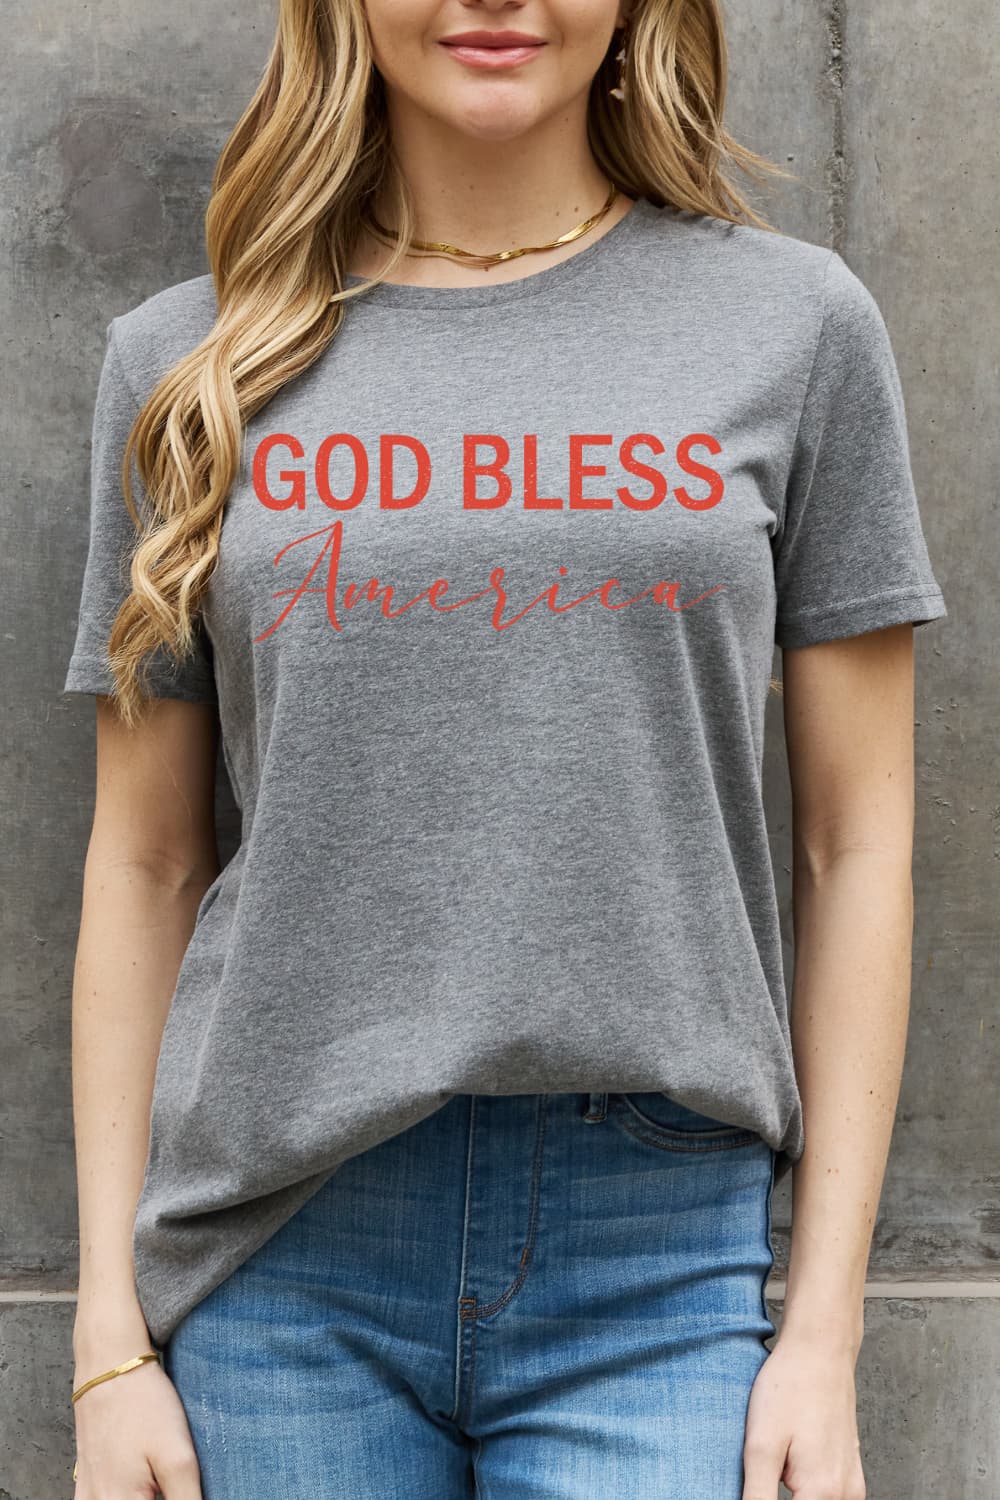 Simply Love GOD BLESS AMERICA Graphic Cotton Tee-TOPS / DRESSES-[Adult]-[Female]-Mid Gray-S-2022 Online Blue Zone Planet